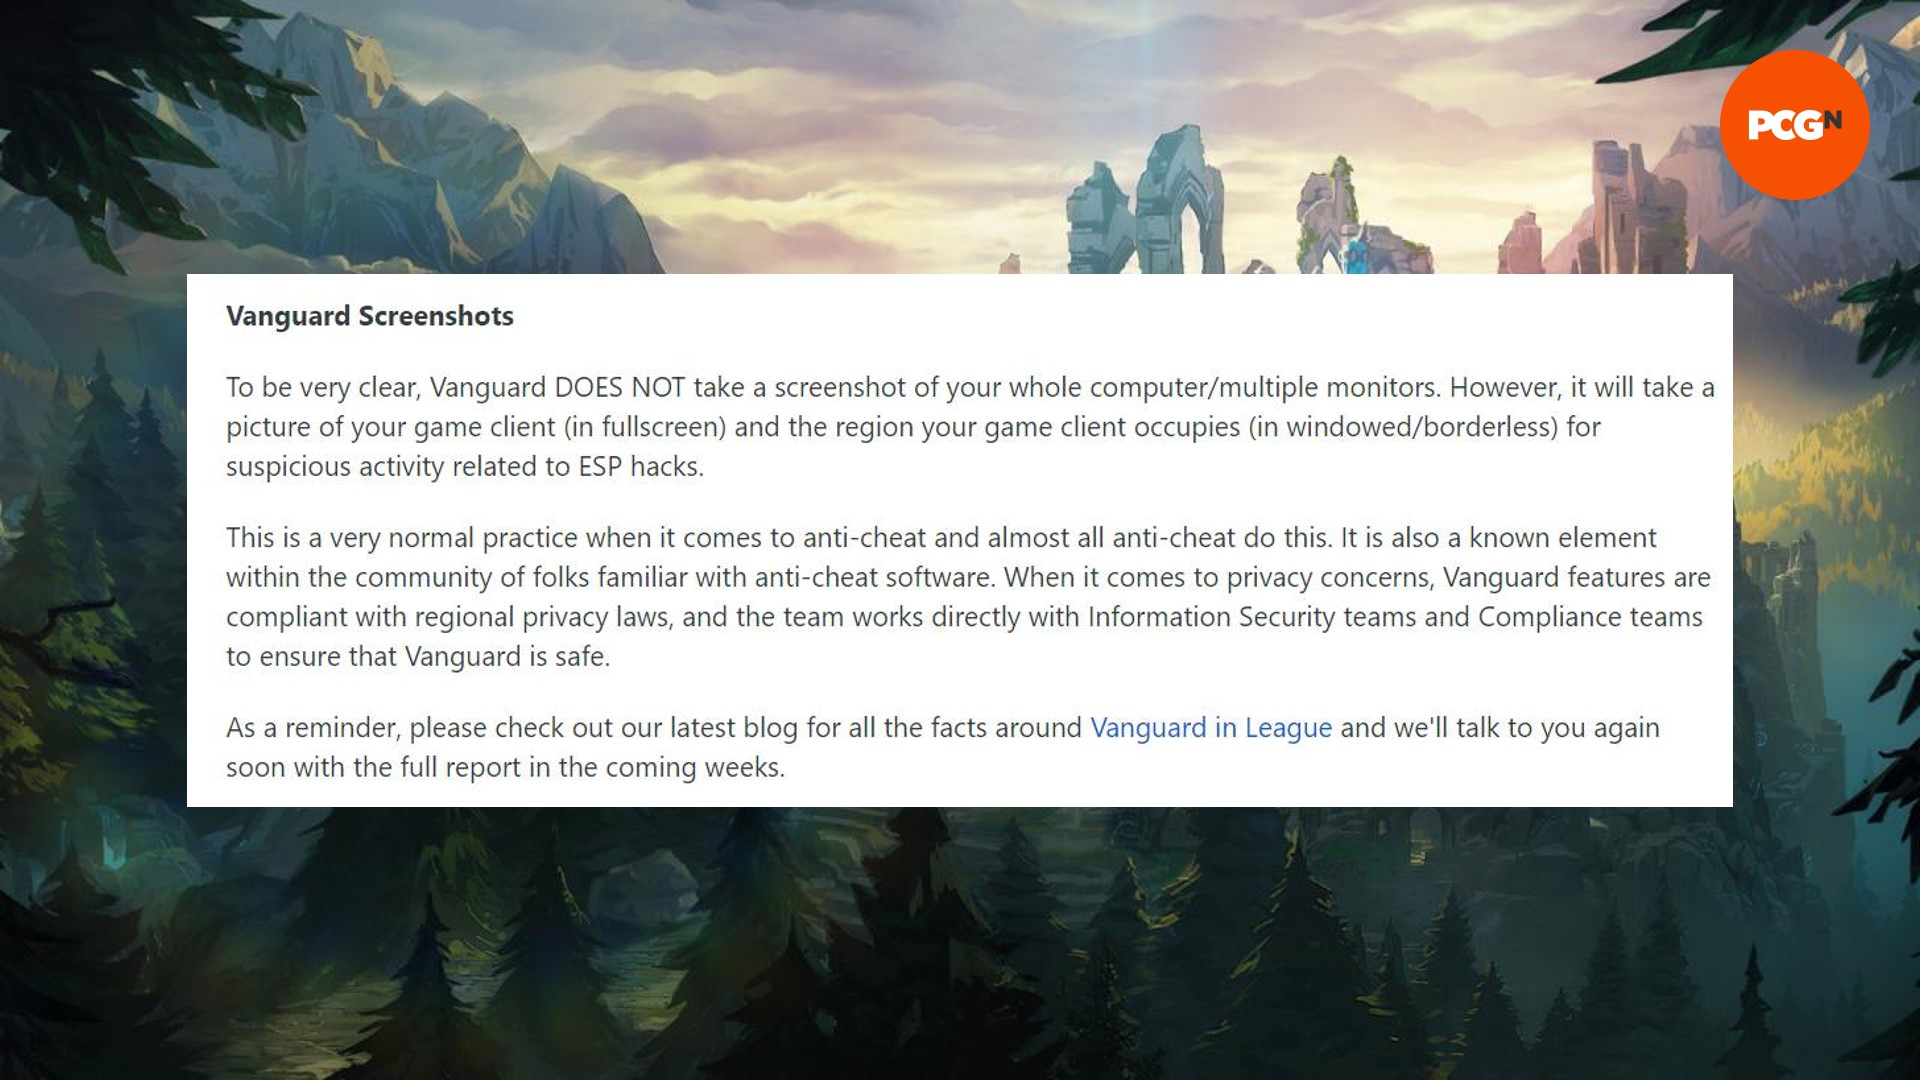 A Reddit post from Riot Games discussing the supposed issues with Vanguard anti-cheat screenshotting on PC